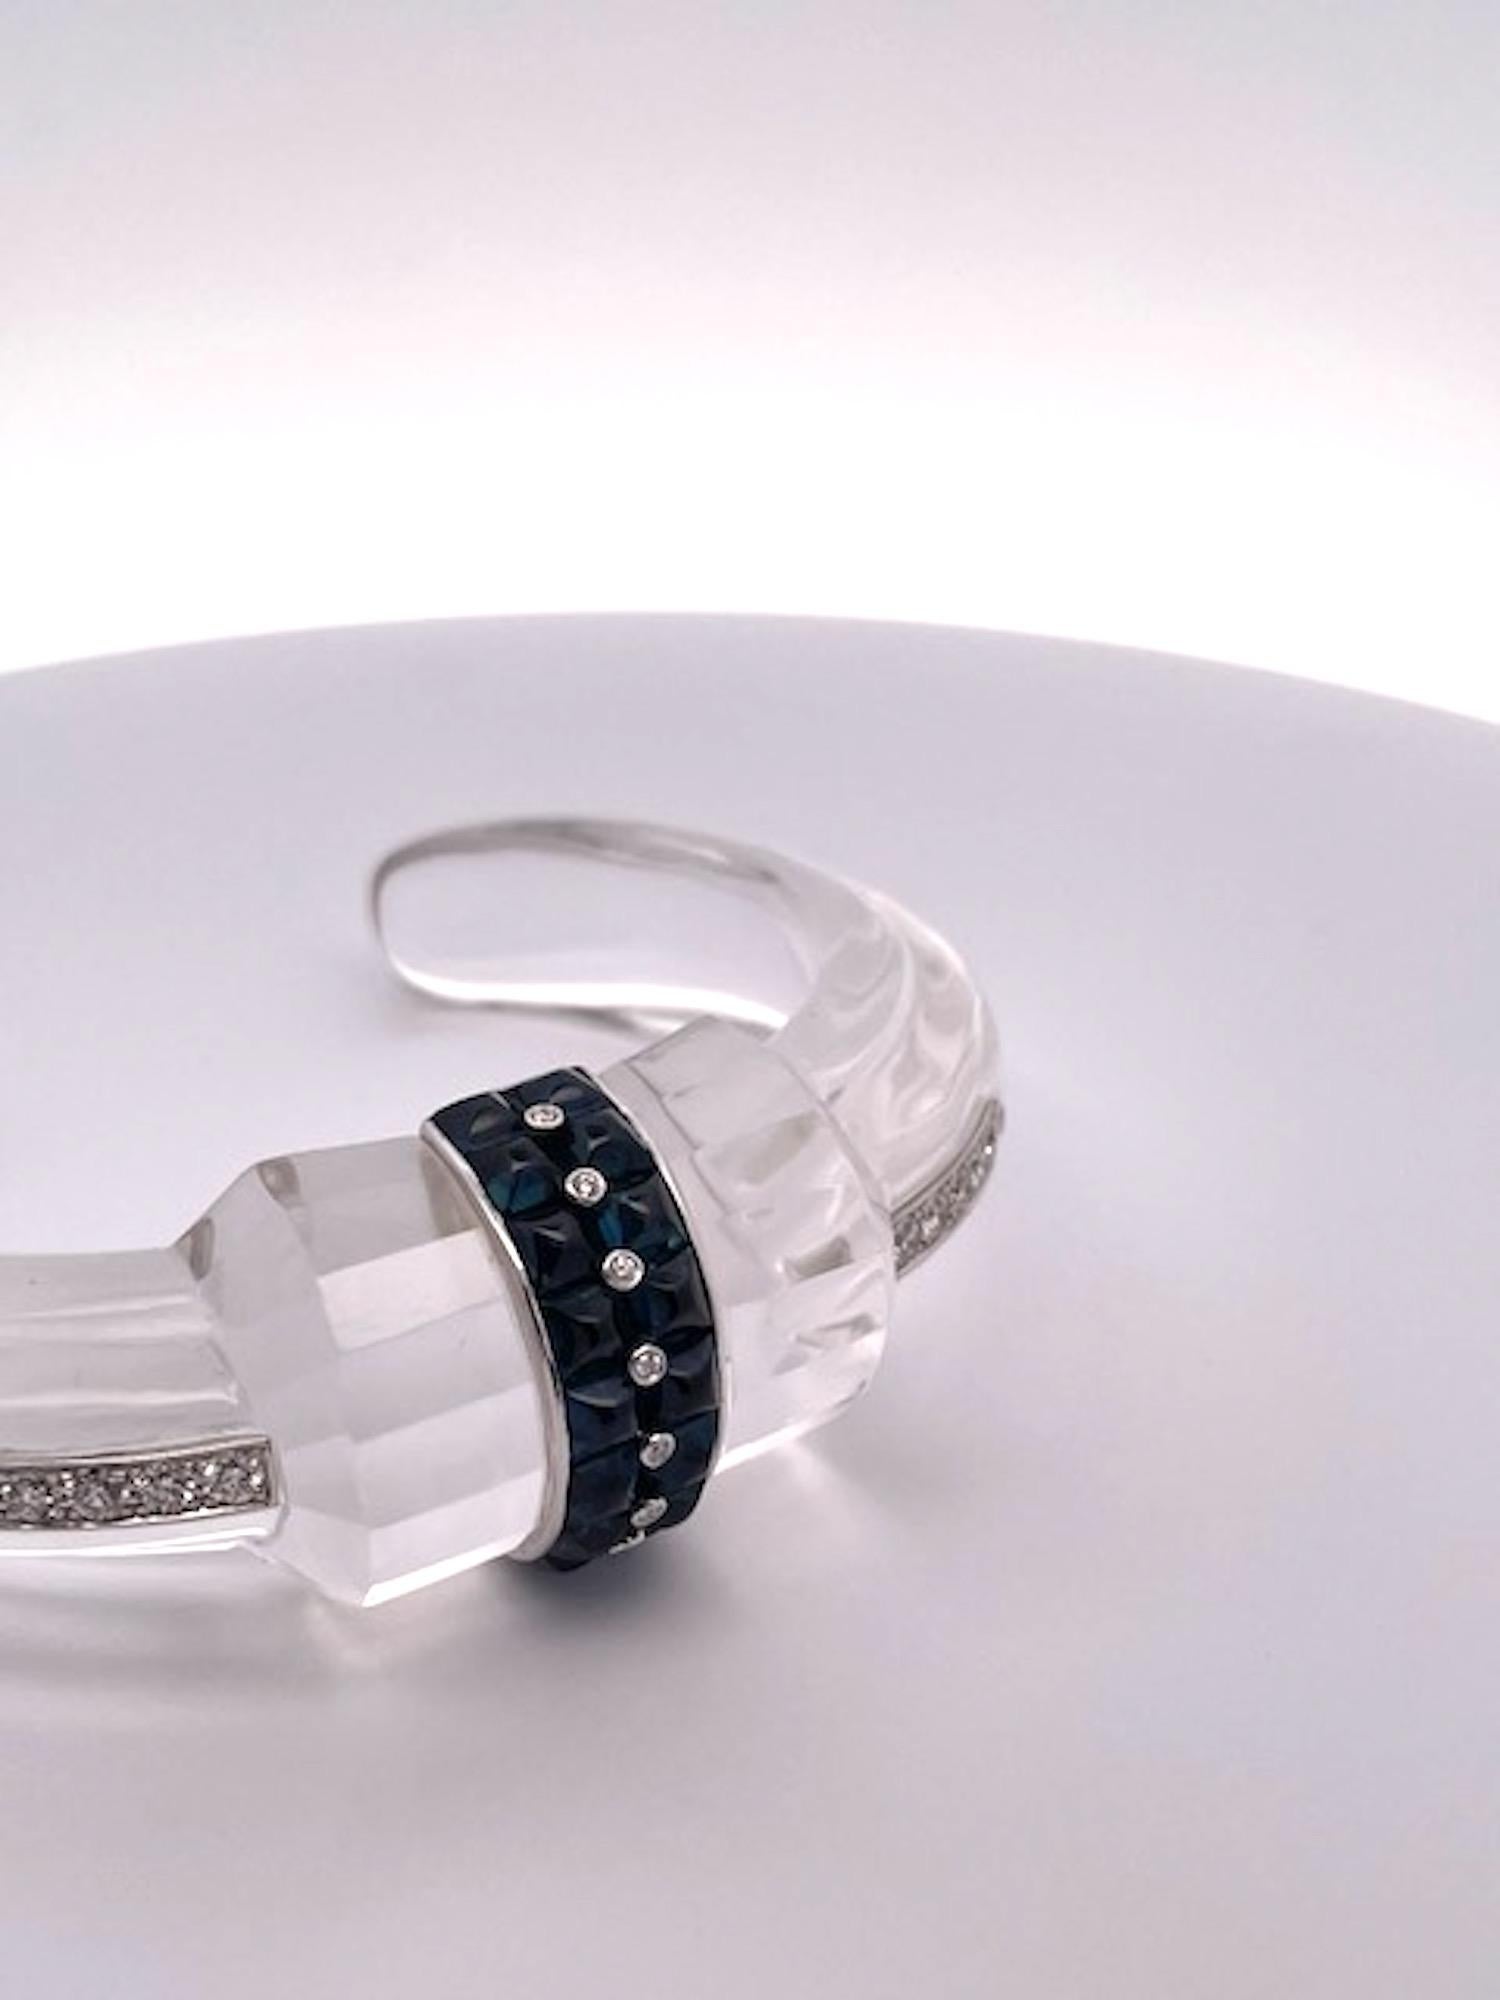 This rock crystal bracelet is clean and lovely.  It sports eight (8) buff top Sapphires with seven (7) collet Diamonds in the center.  It also boosts 6 Diamonds on each side for a bit more spark.  The inside is stamped Boucheron but with further